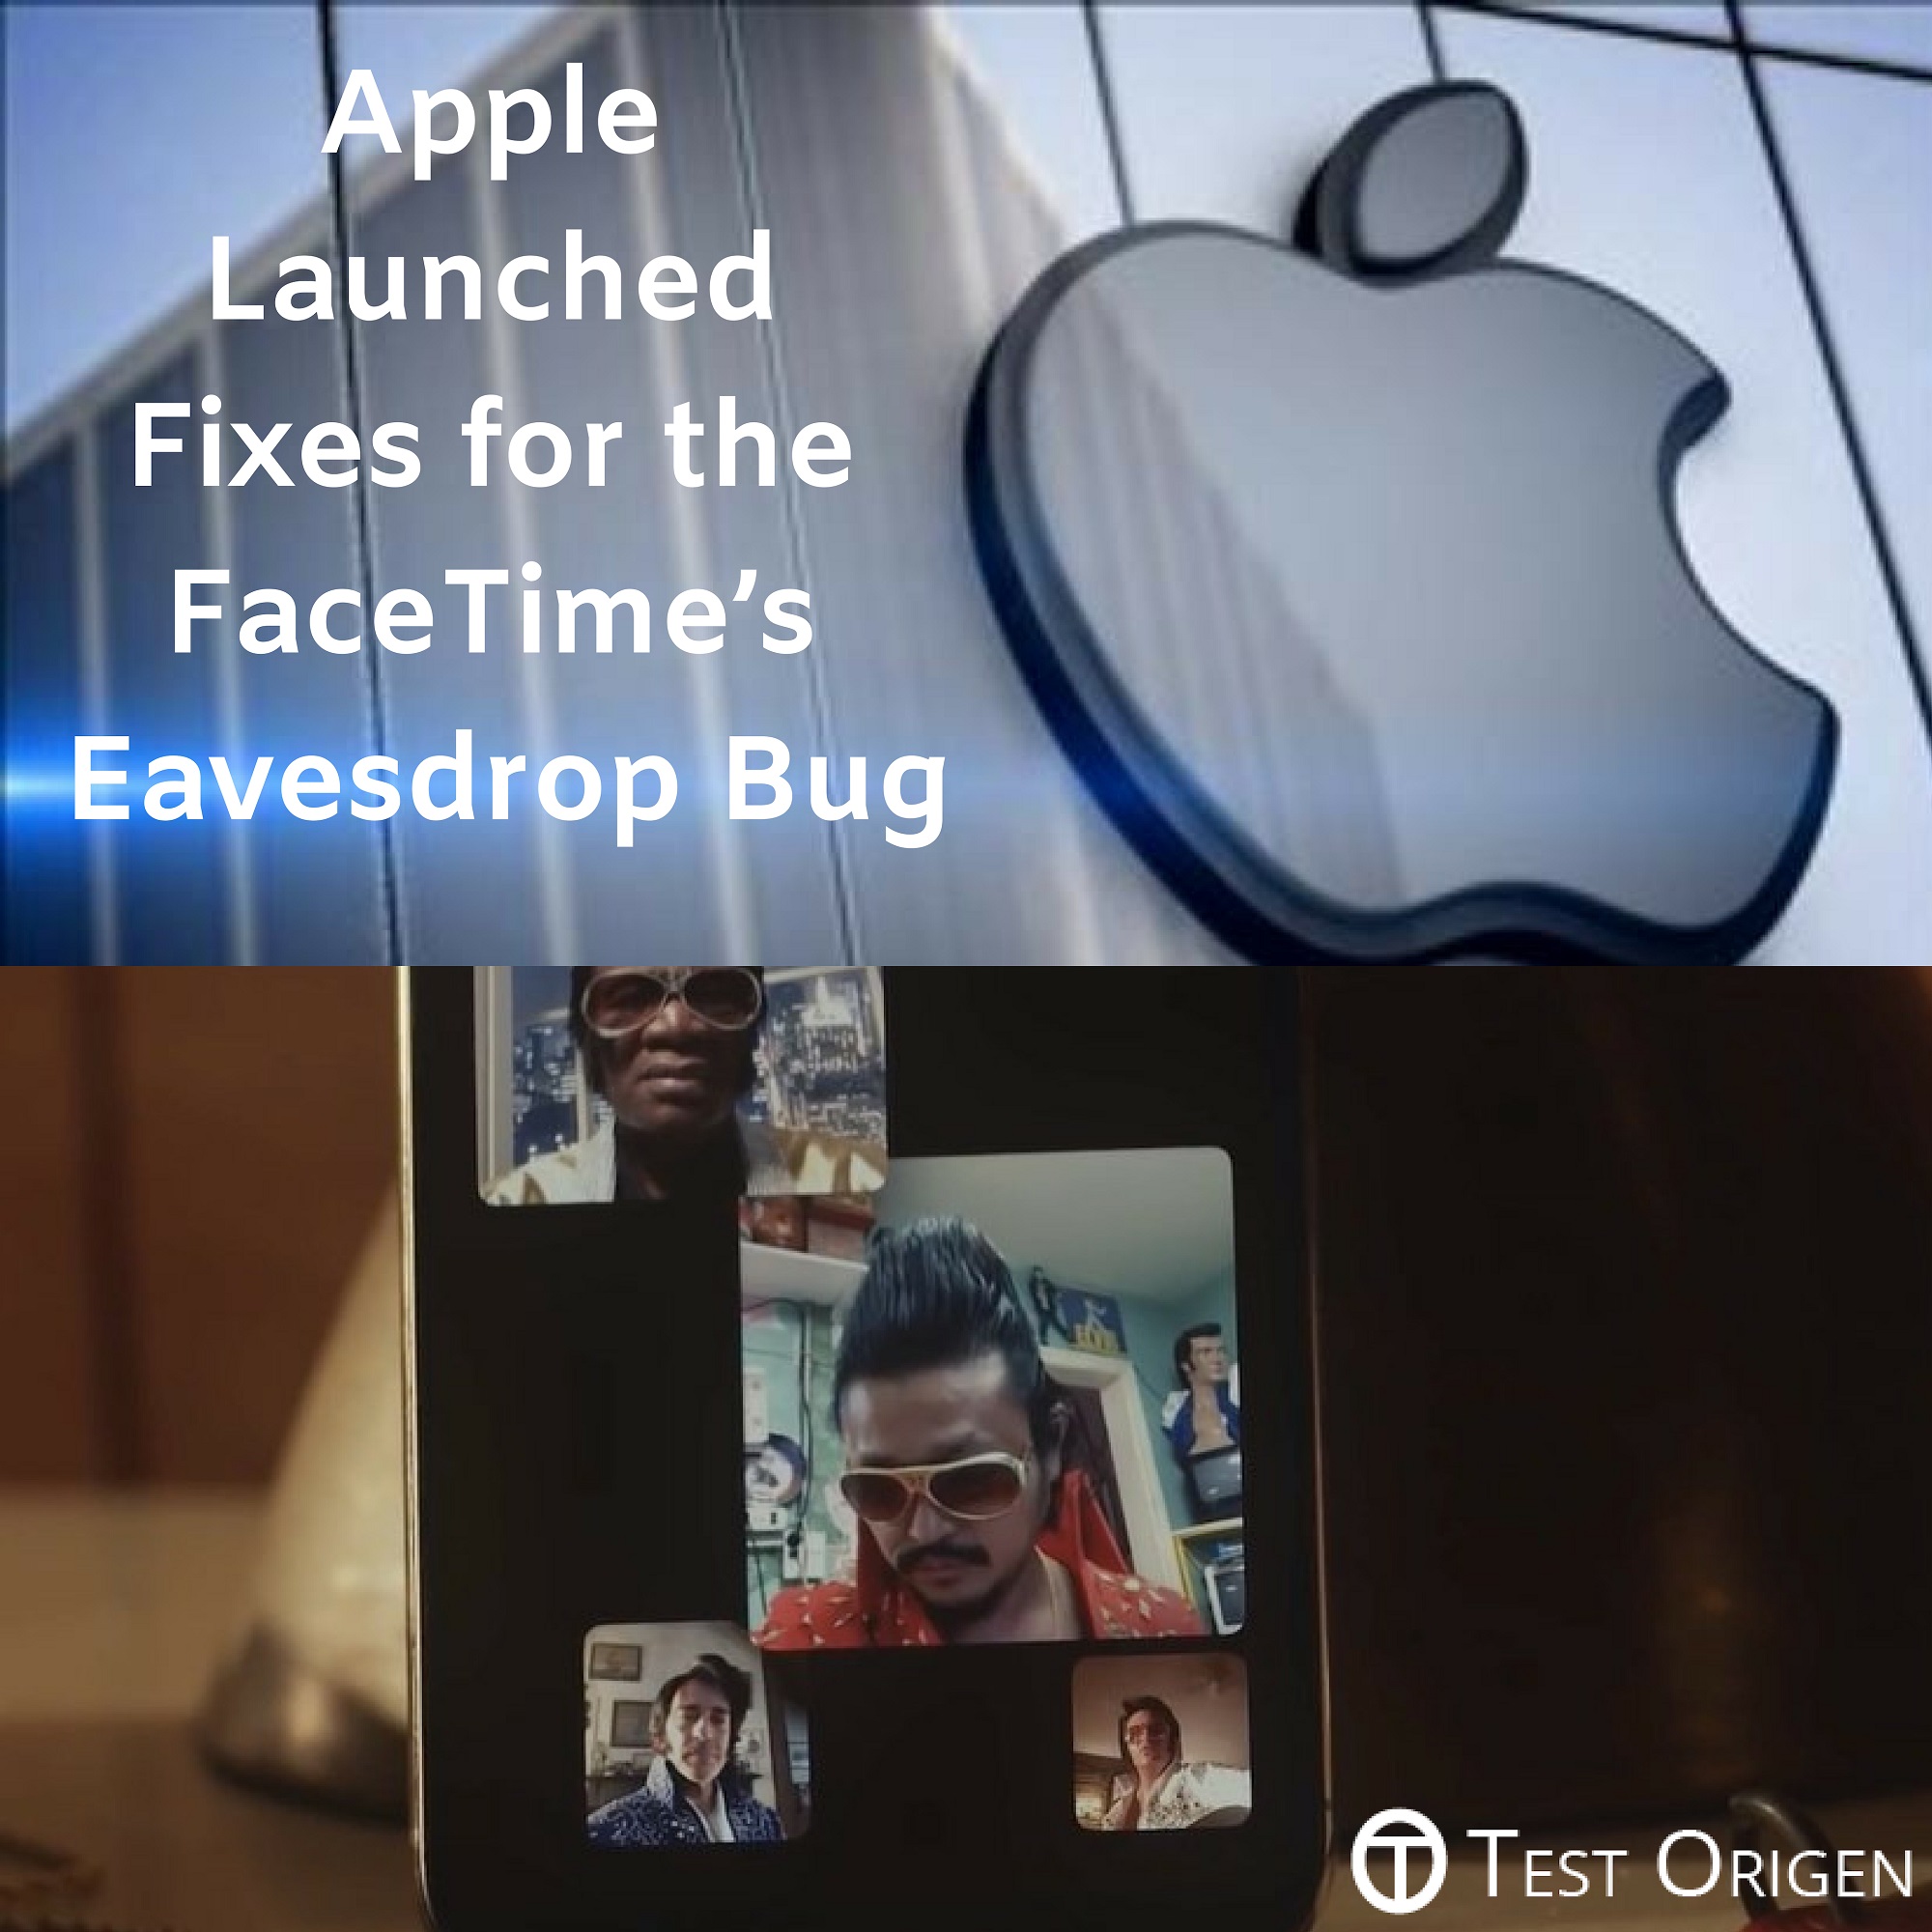 Apple Launched Fixes for the FaceTime’s Eavesdrop Bug